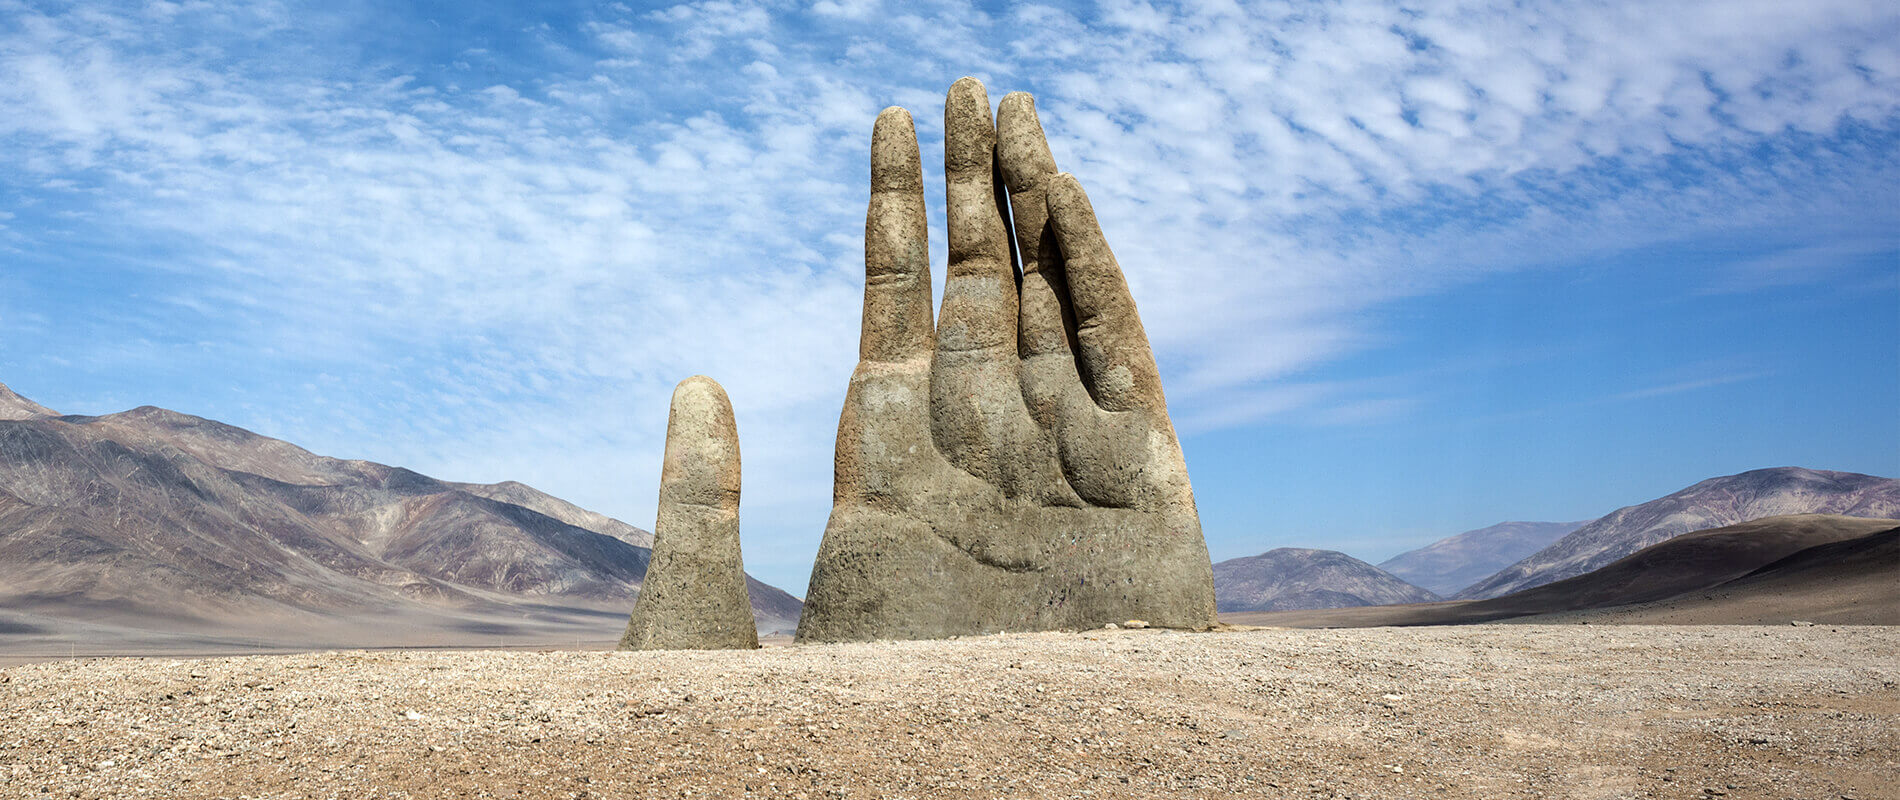 Did You Know There’s A Giant Hand In The Middle Of The Desert In Chile?